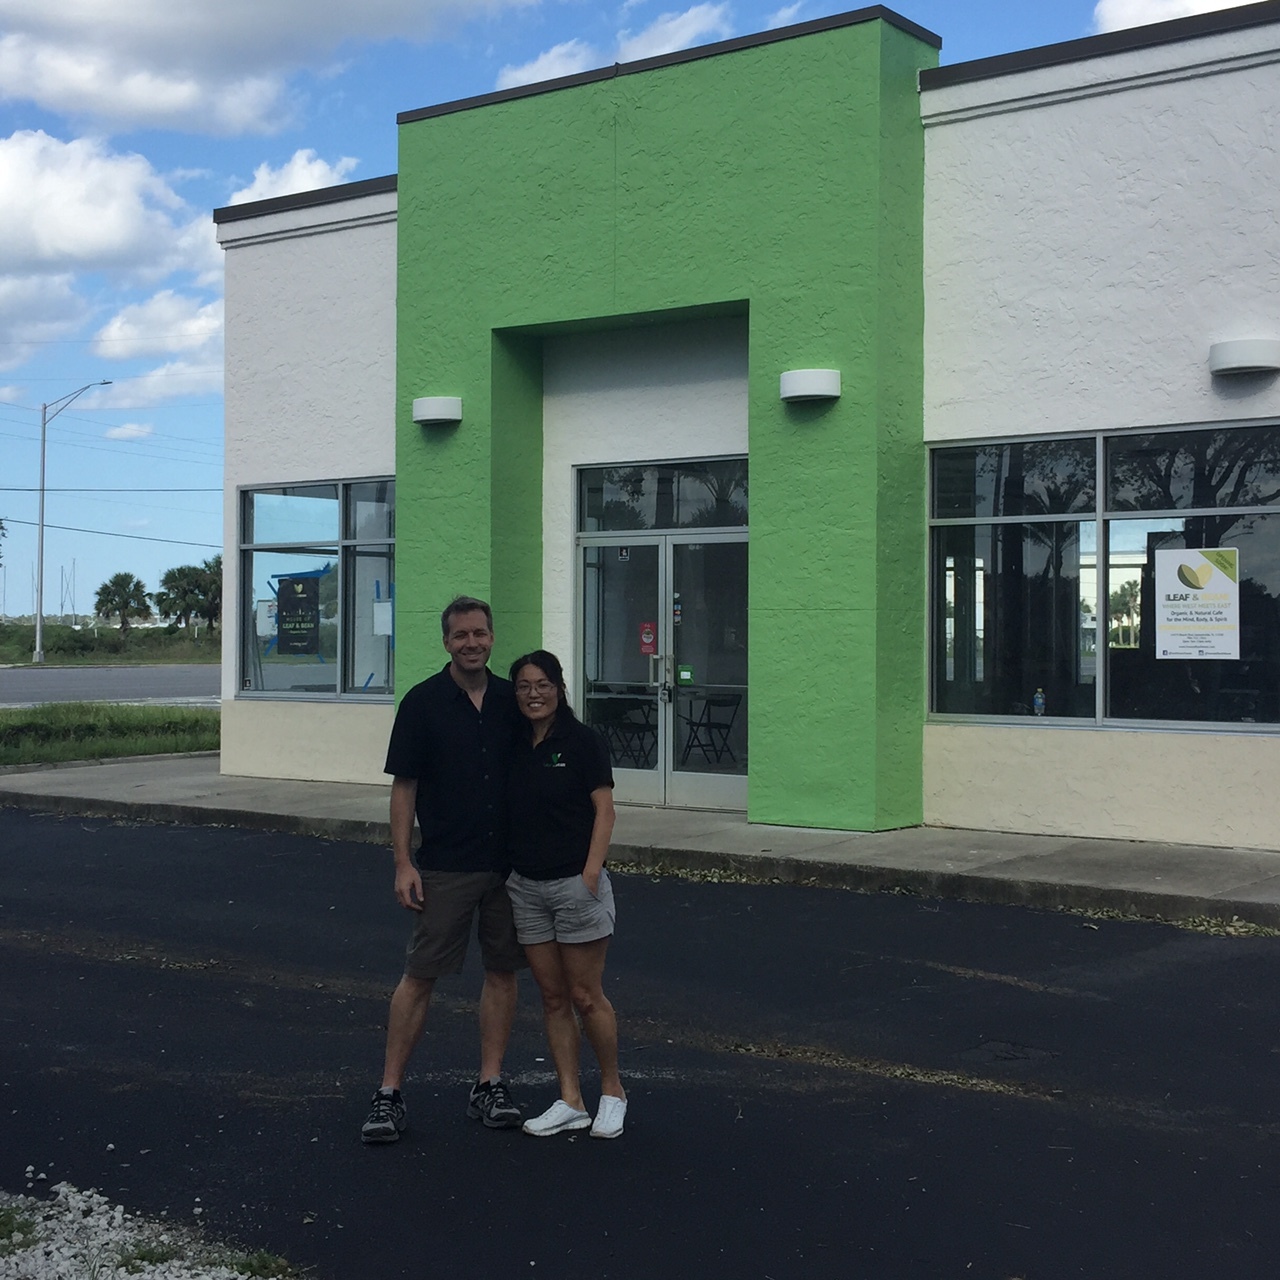 Jon and Wen Raiti are remodeling a former Taco Bell into the House of Leaf & Bean at 14474 Beach Blvd.